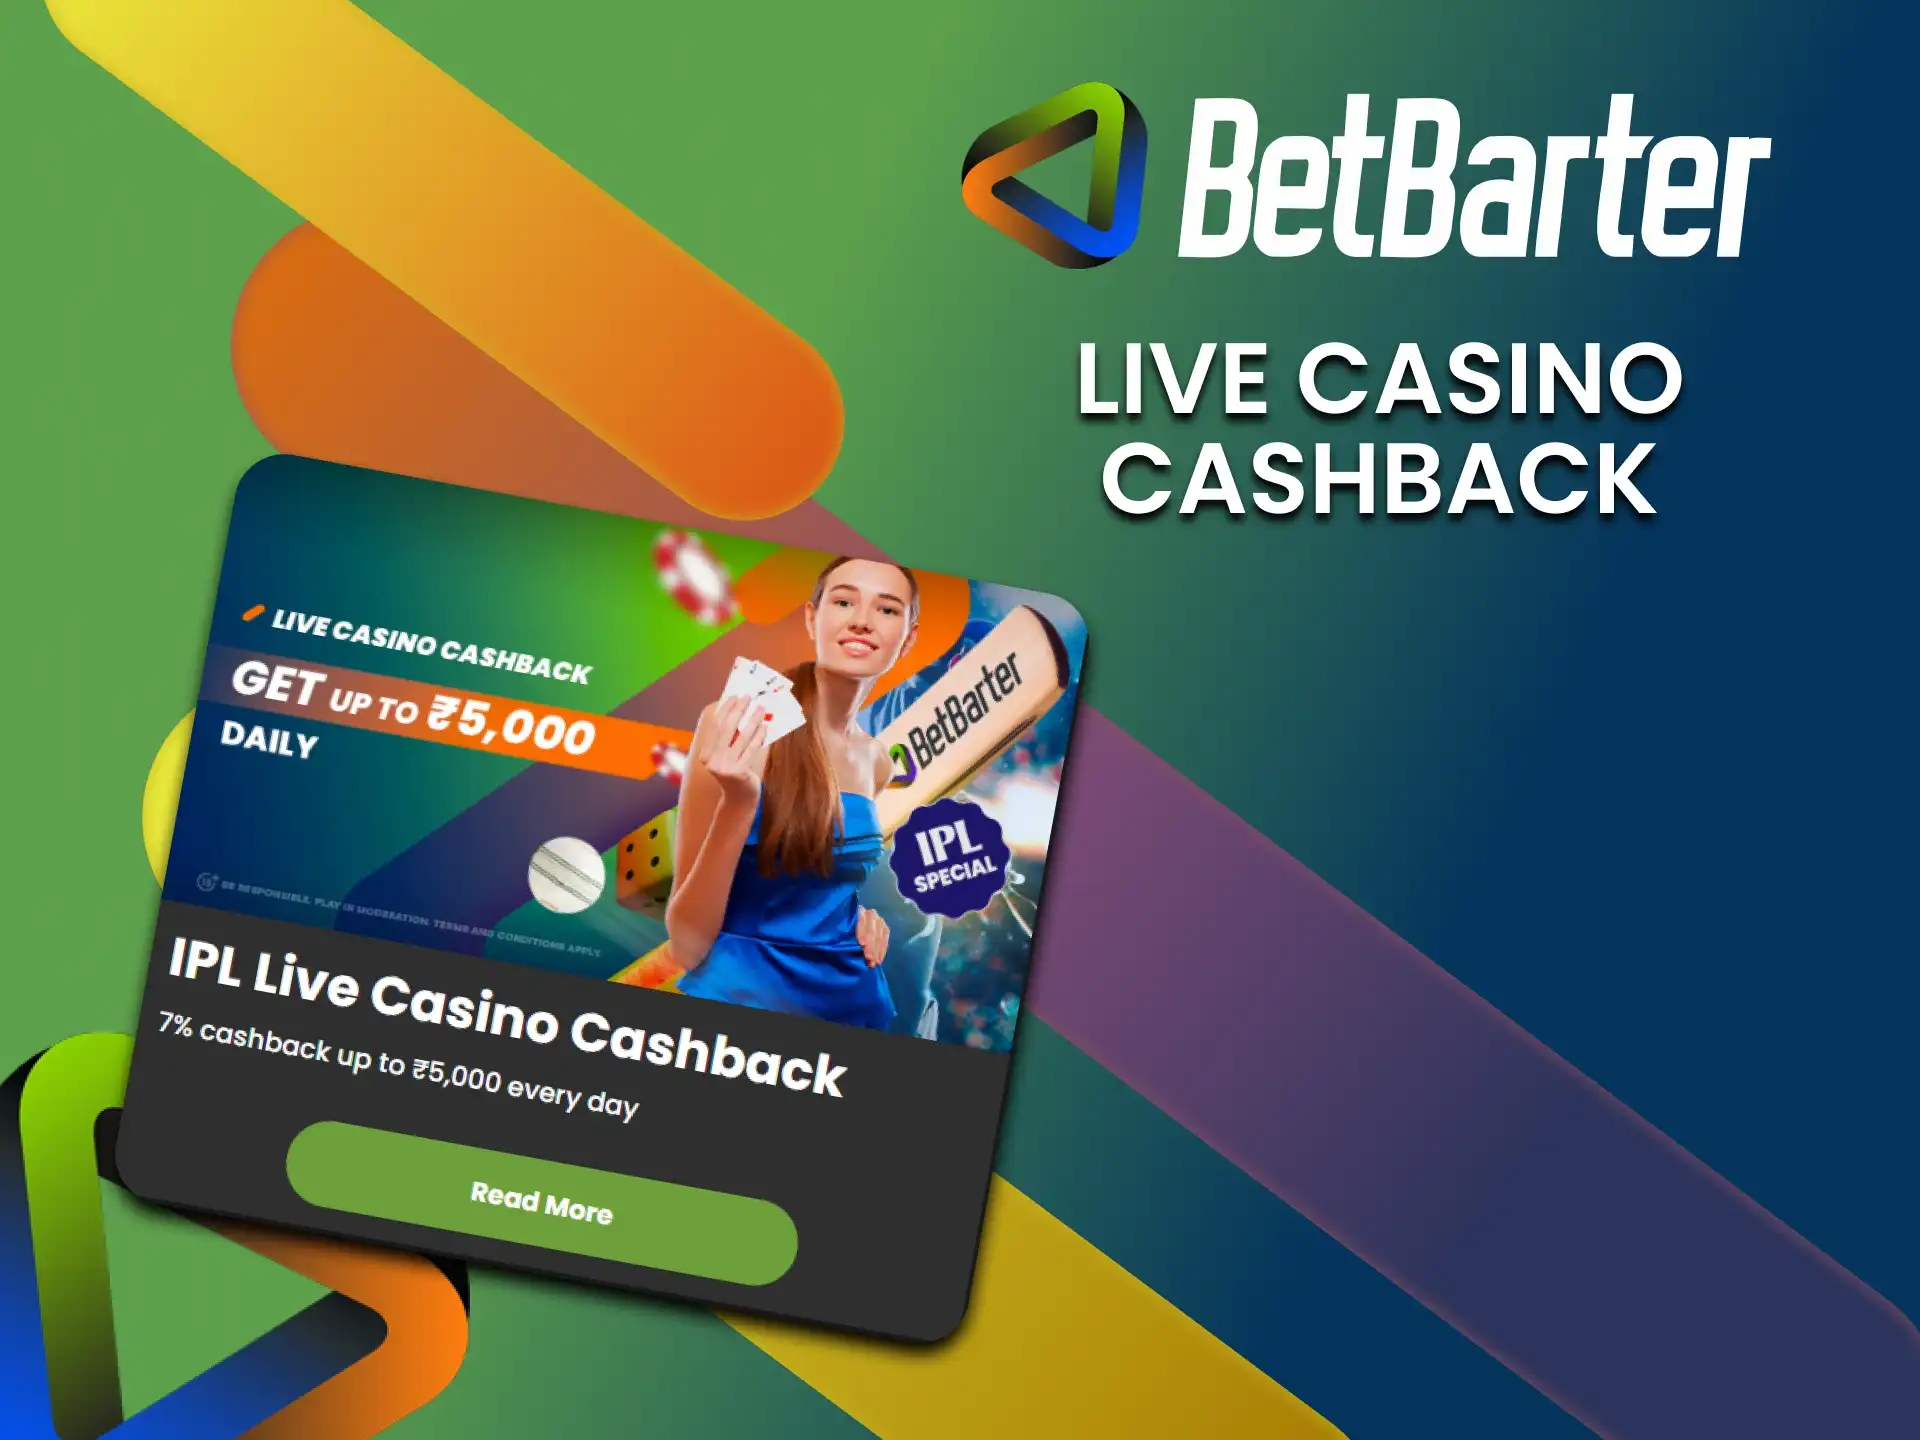 Play effectively at BetBarter app (apk) here you can get a solid return percentage within 24 hours.